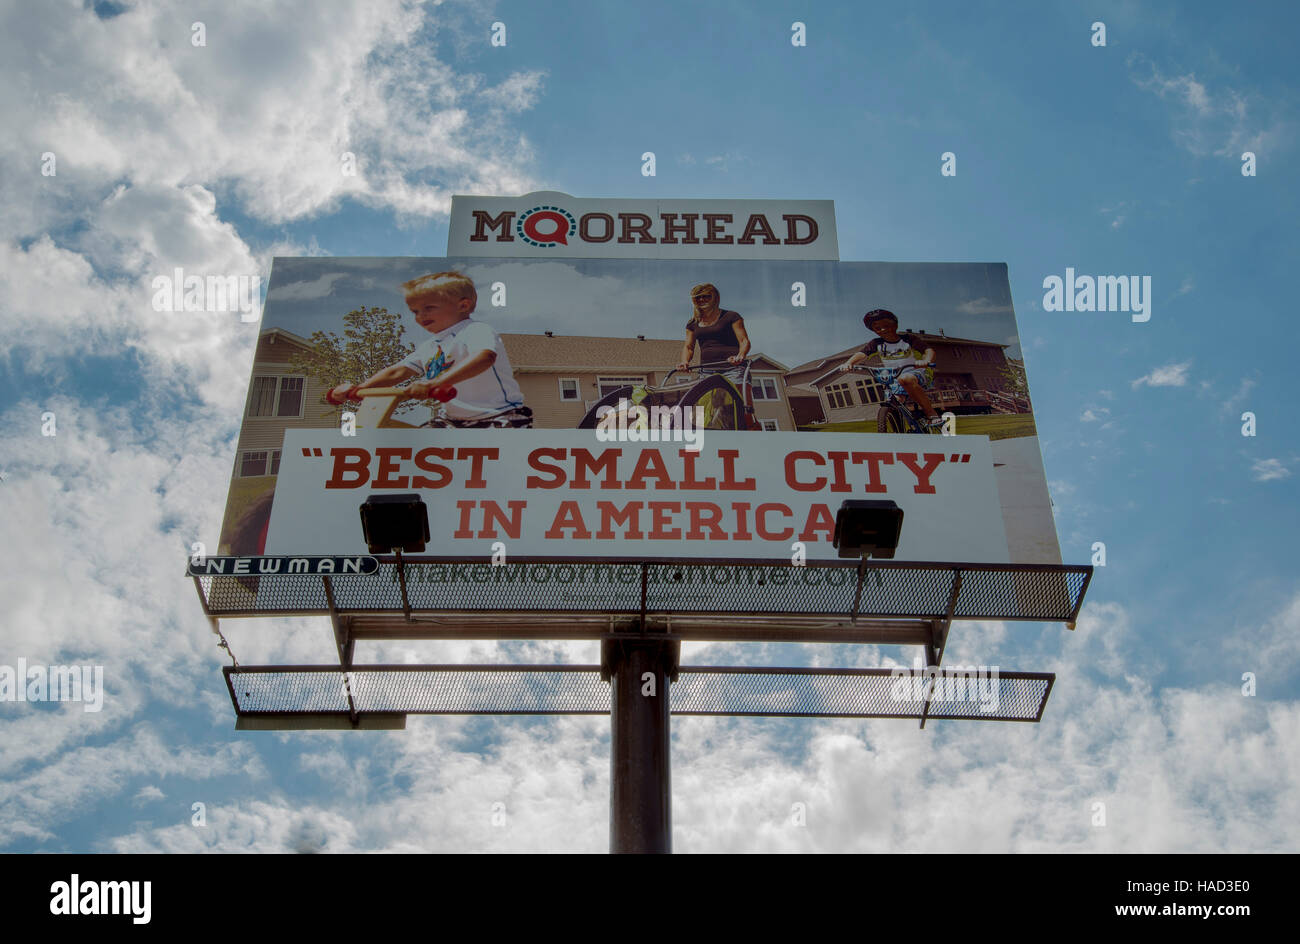 Moorhead, Minnesota. Voted best small city in America. The financial services website Nerdwallet.com named Moorhead as the Best Small City in America Stock Photo